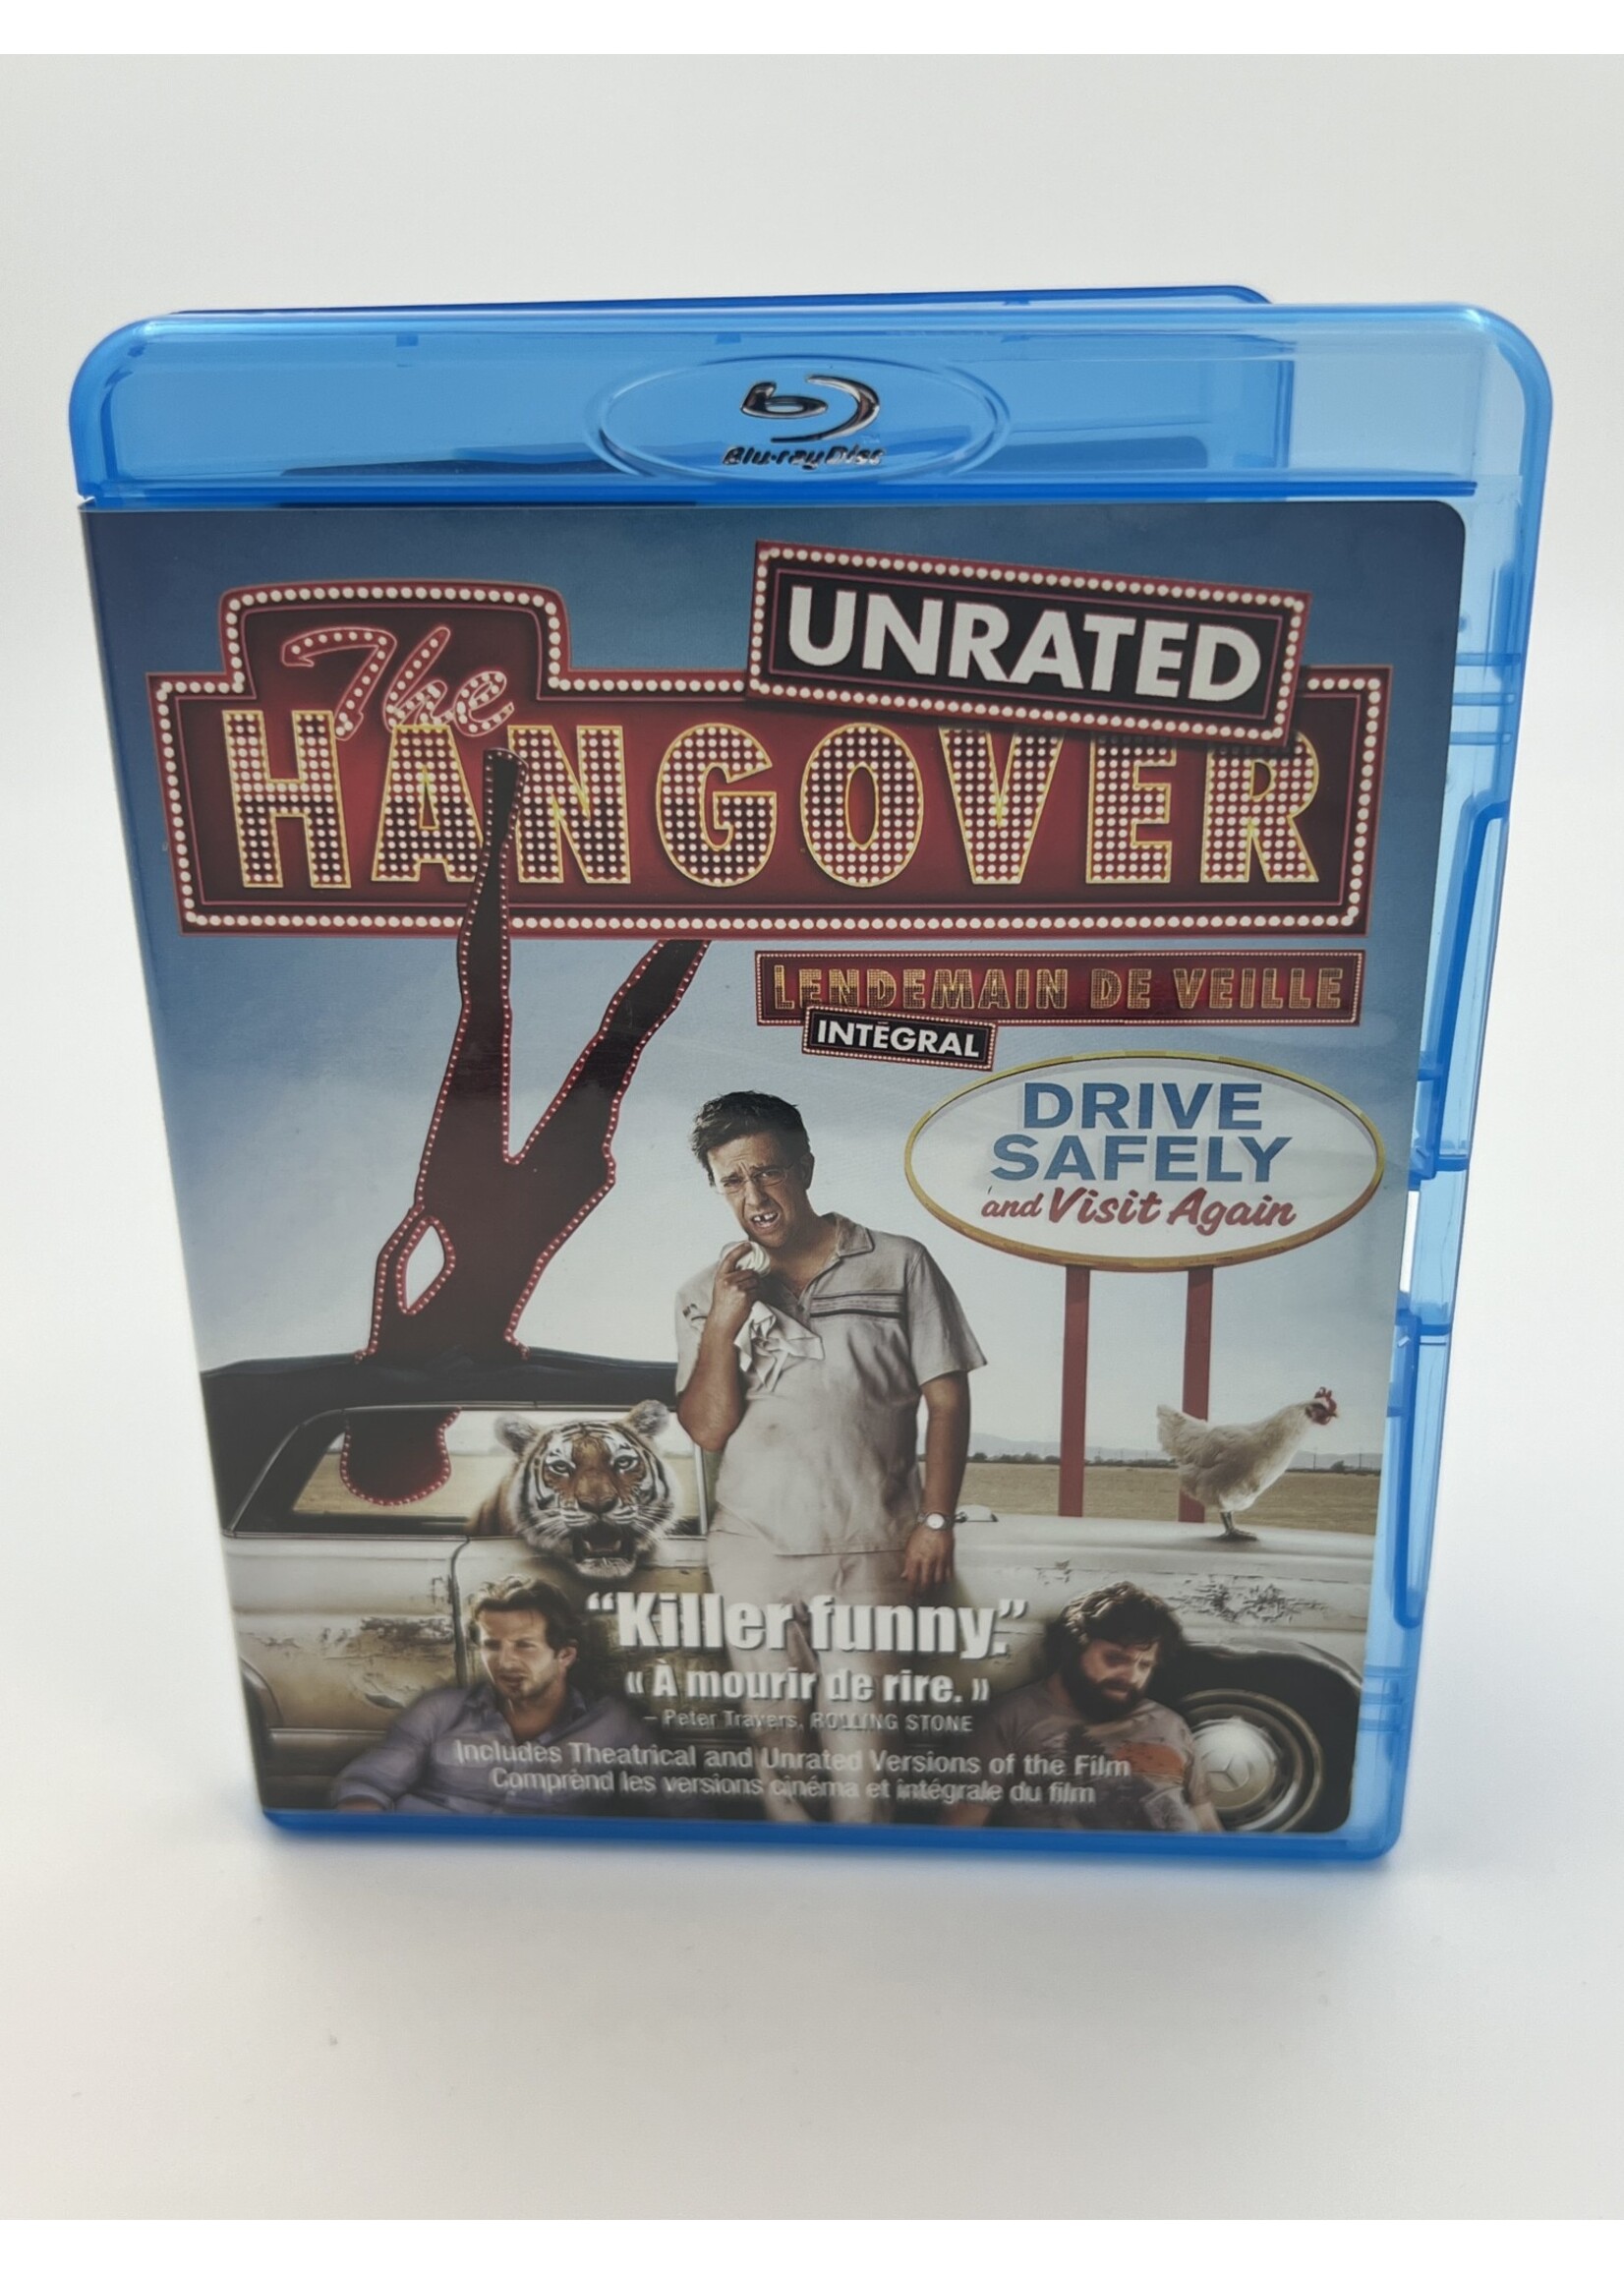 Bluray The Hangover Unrated Bluray